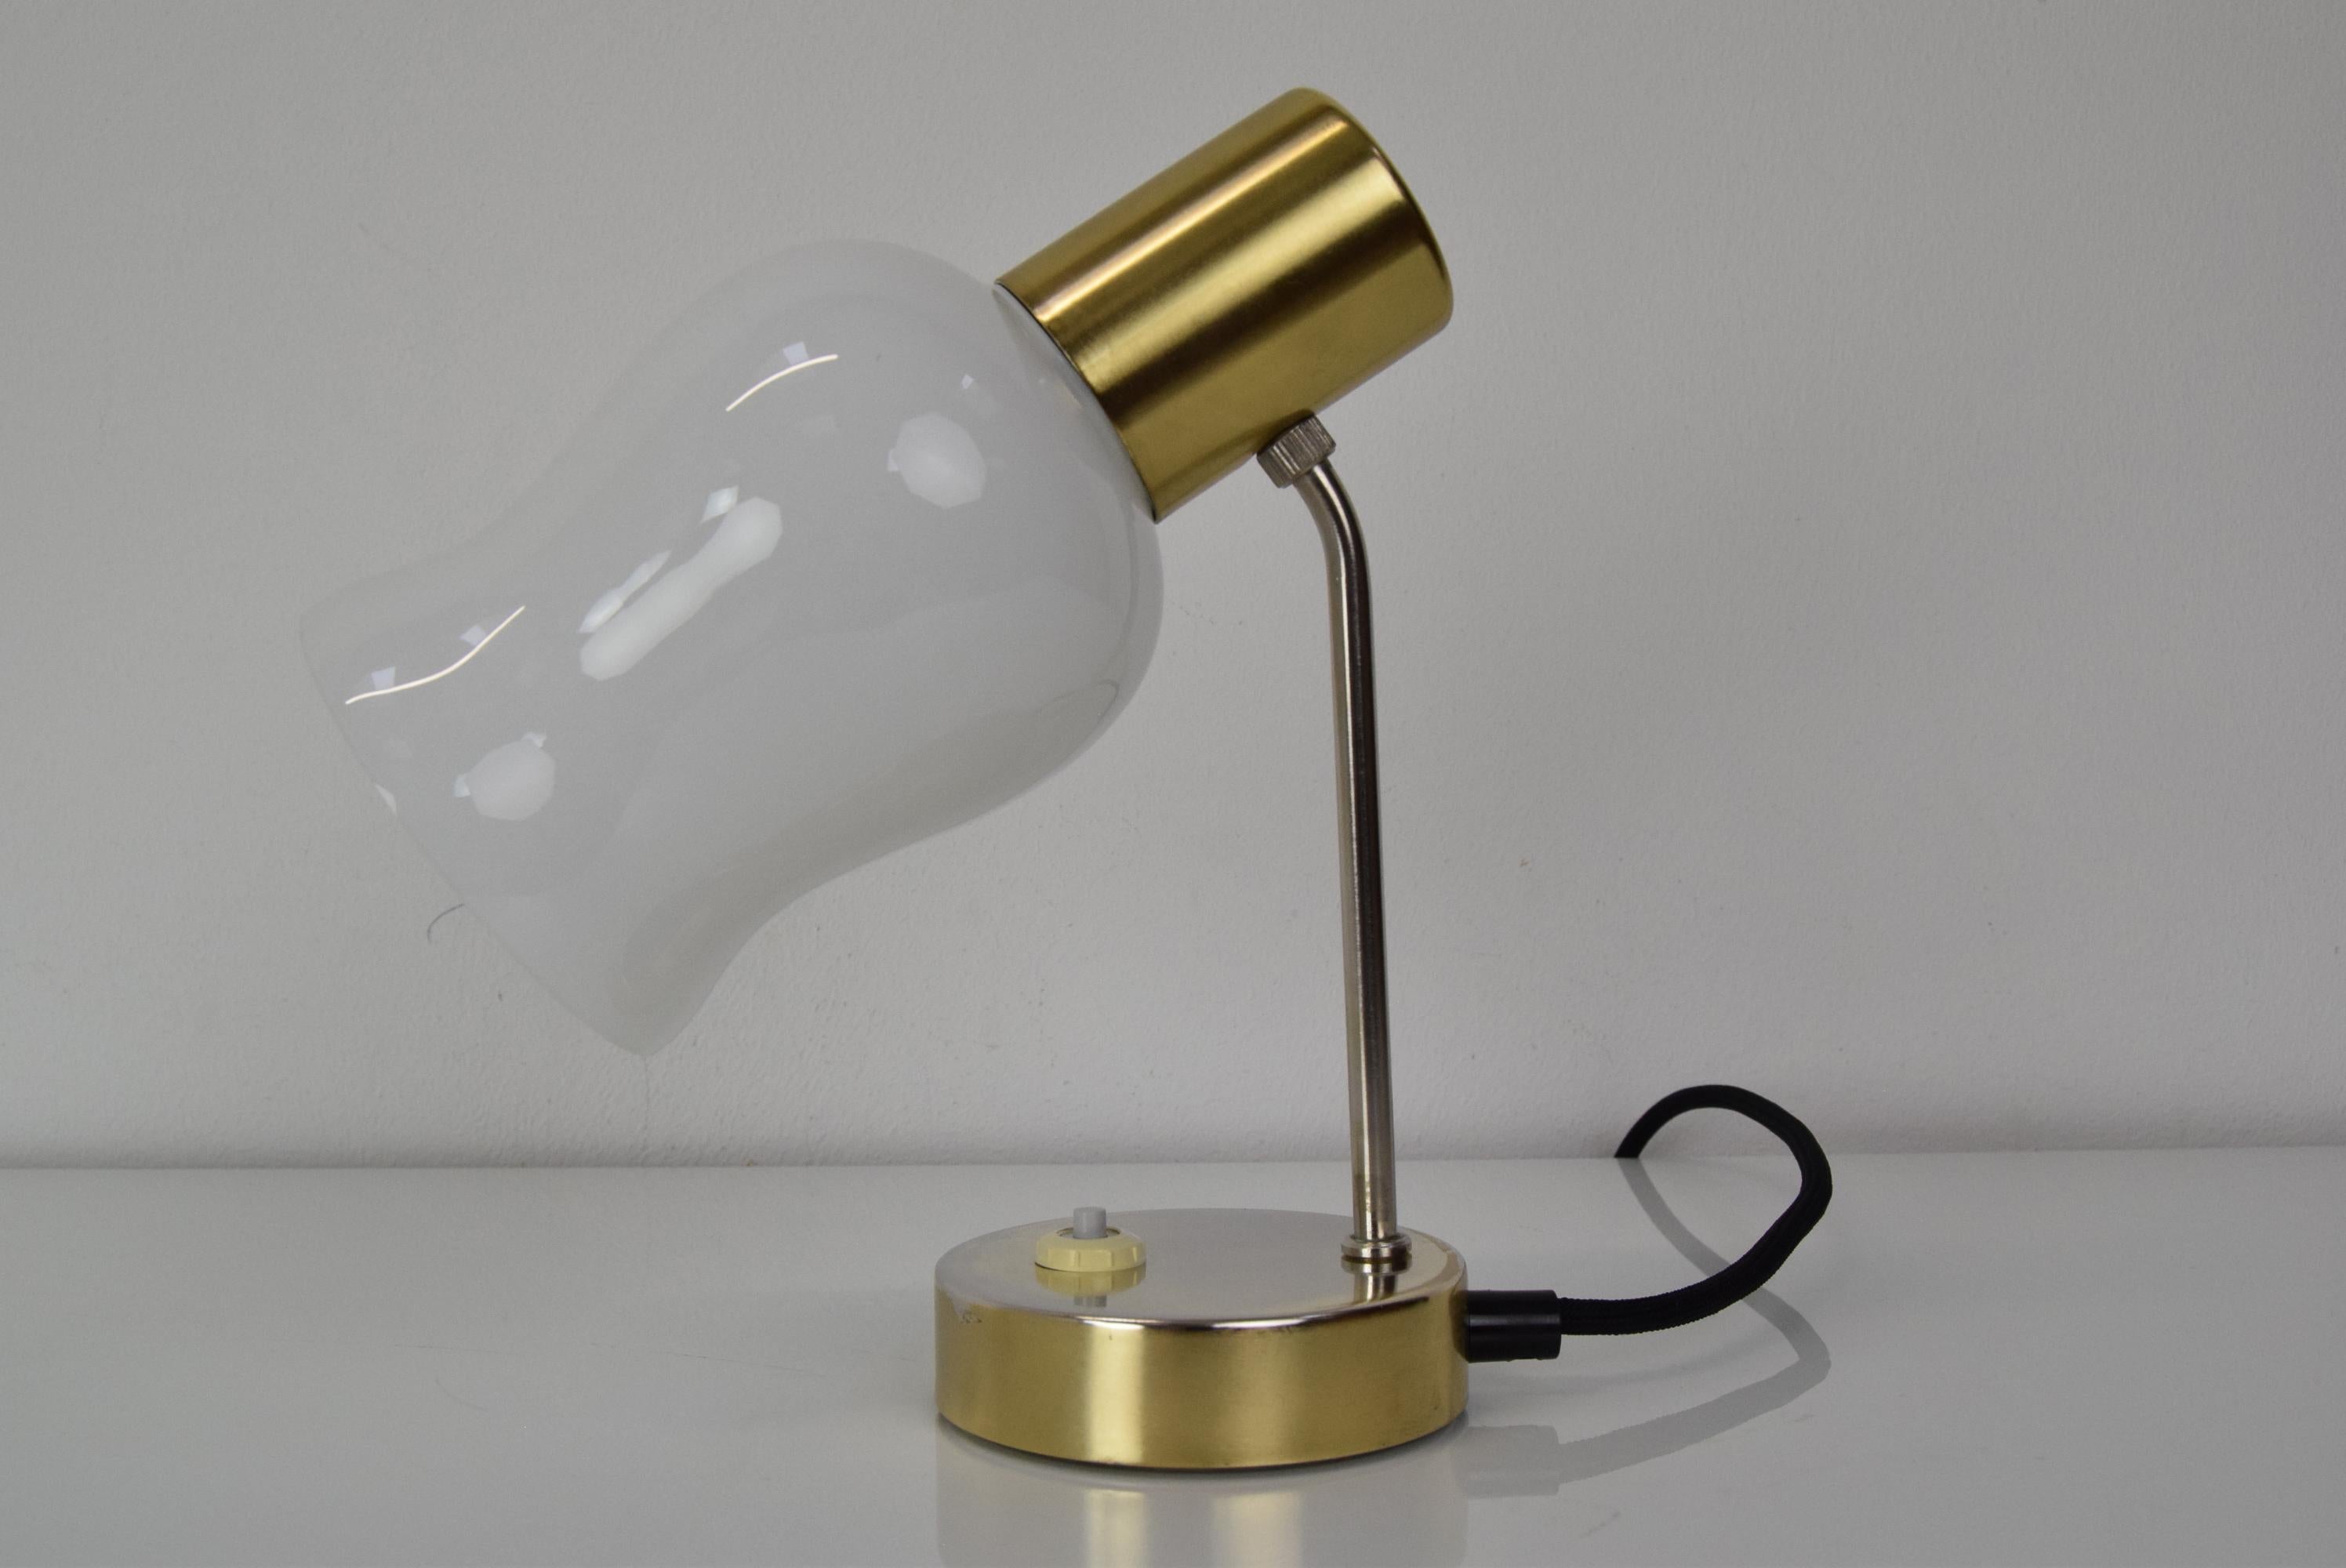 Made in Czechoslovakia
Made of Glass, Brass, Metal
With aged patina
New wiring was installed
1x40W,E14 or E15 bulb
Good Original condition
US adapter included.